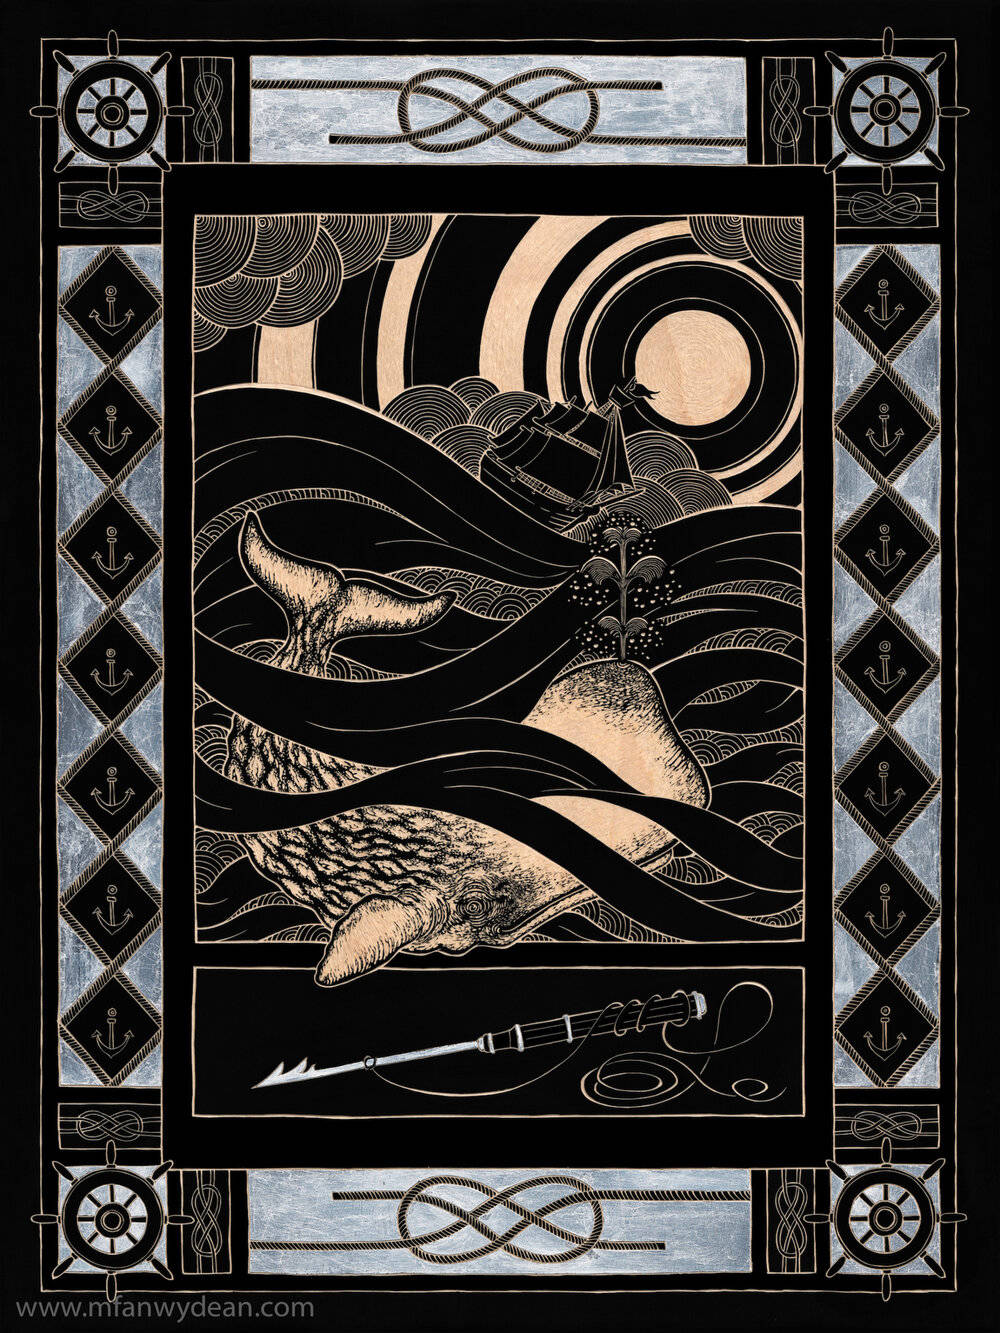 M’fanwy Dean’s new carved panel, “The White Whale,” is on exhibit Friday, July 2, 2021, at the Dean Gallery near Homer, Alaska. (Photo provided)